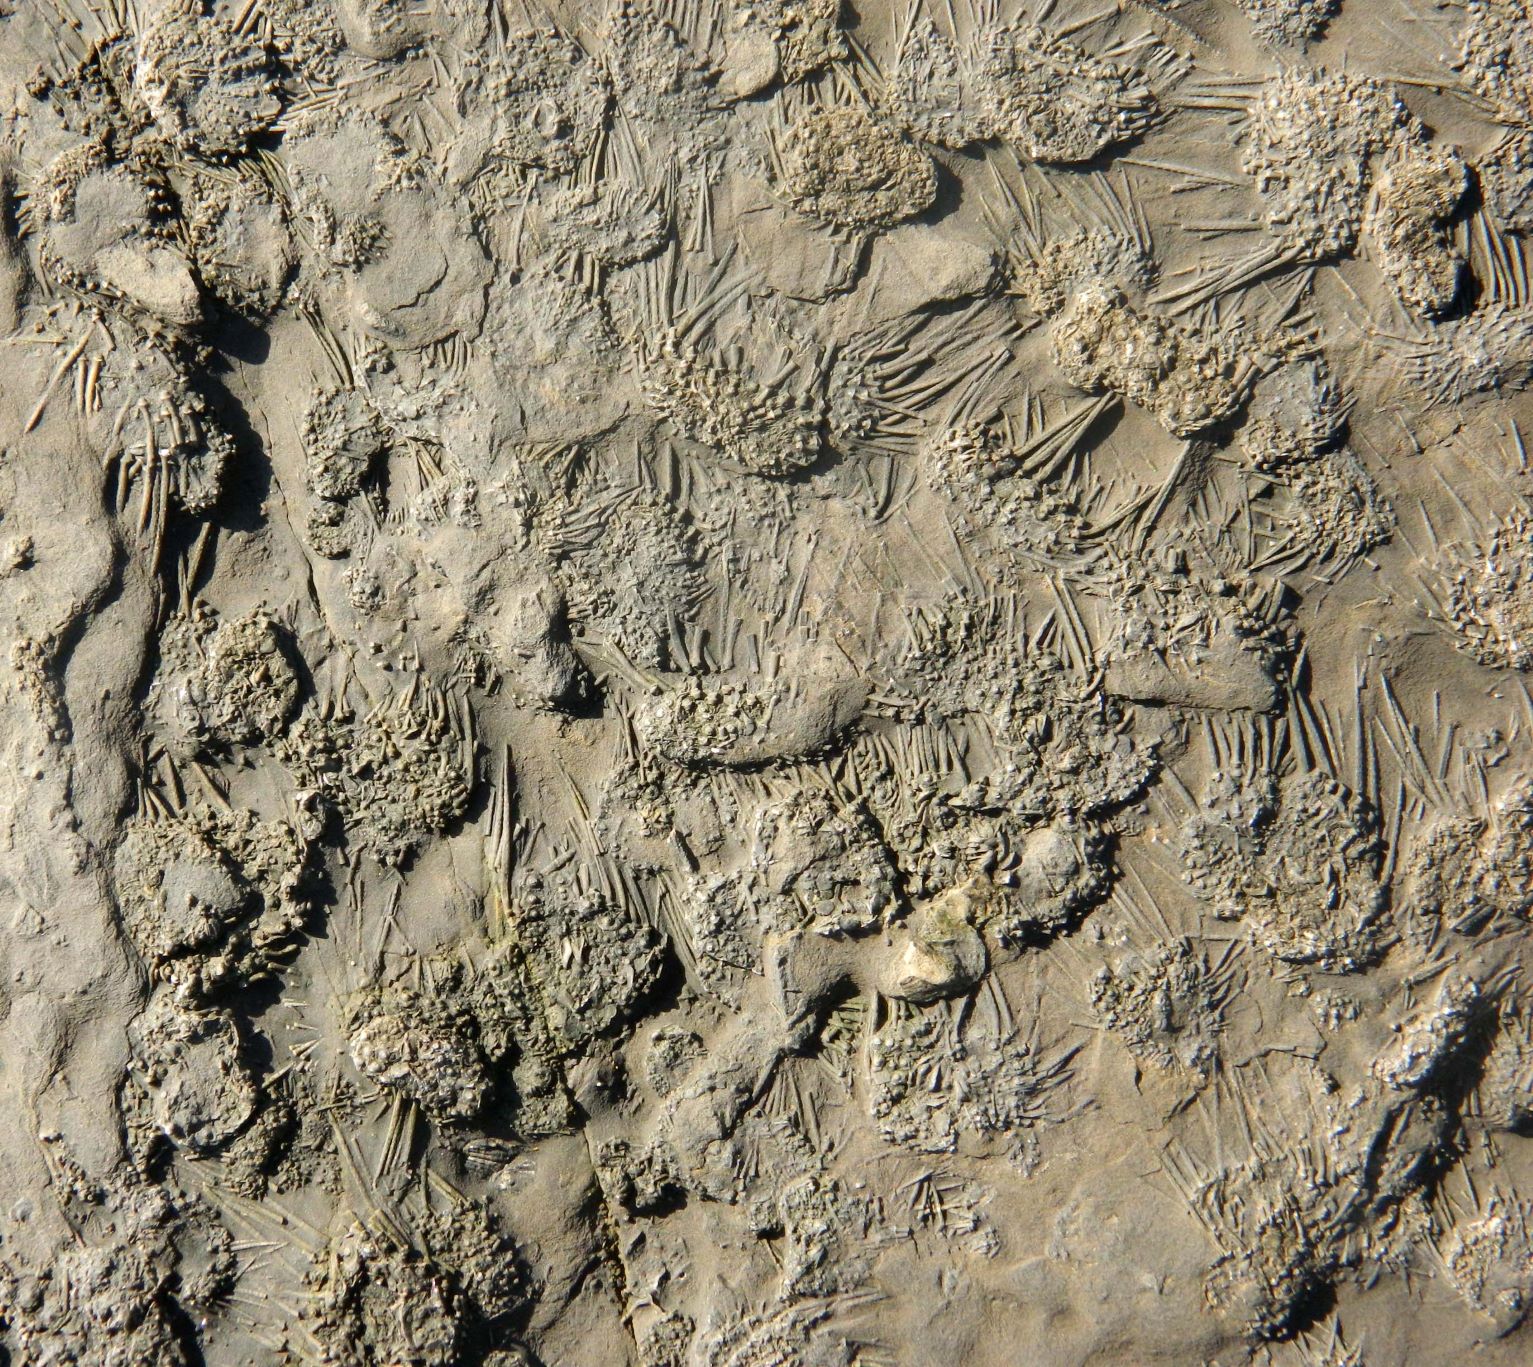 A close-up view of the Hook Head fossil sea urchins where their spines are visible.